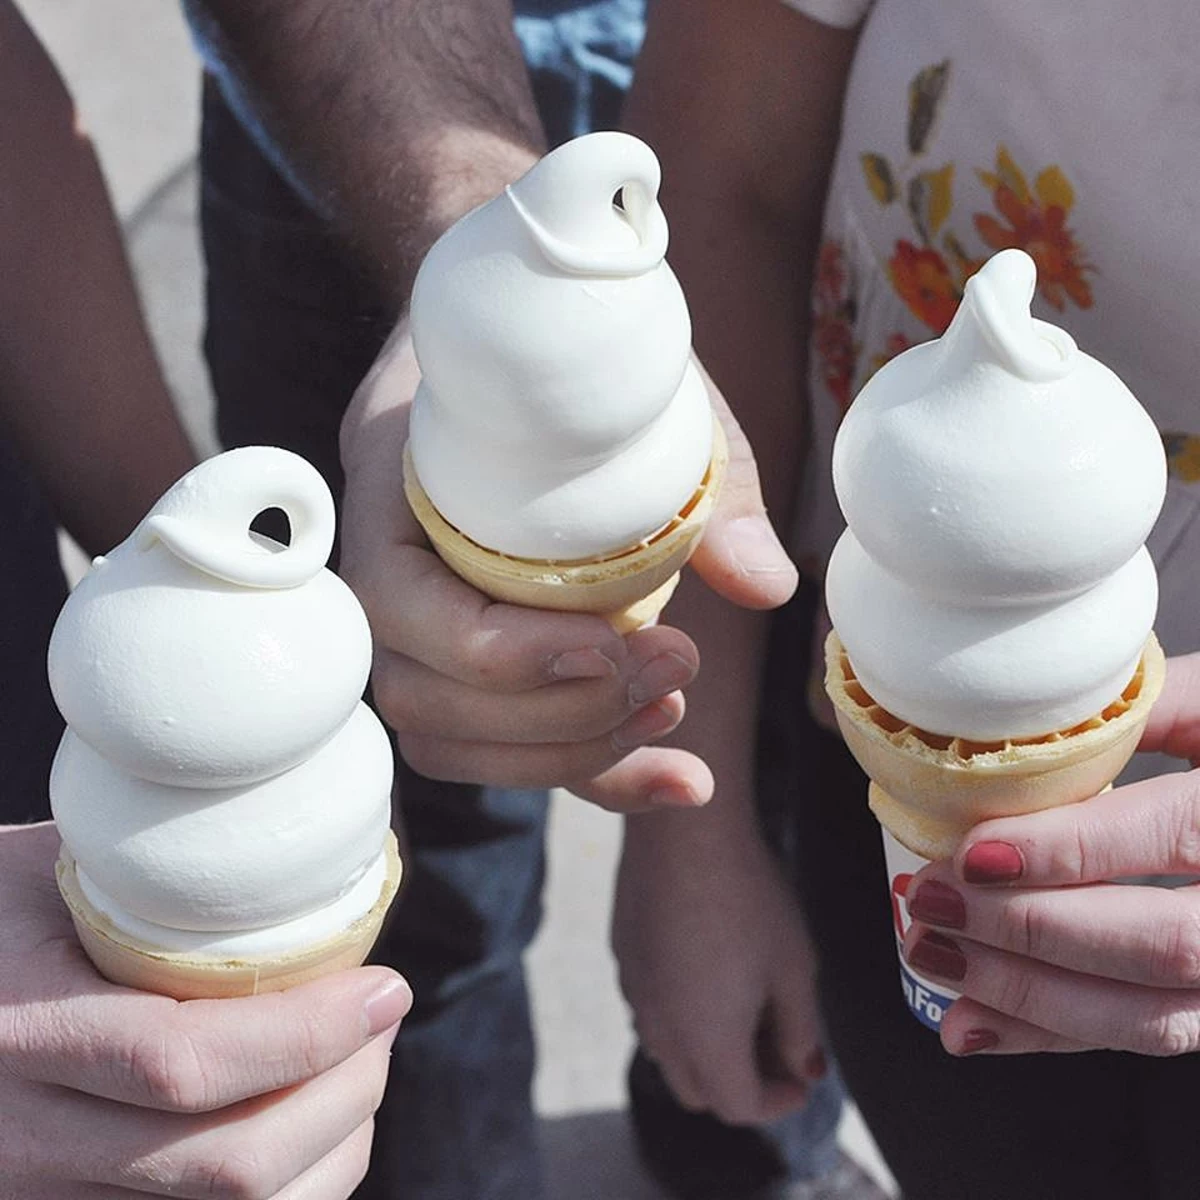 Dairy Queen Offering Free Ice Cream Cone on First Day of Summer